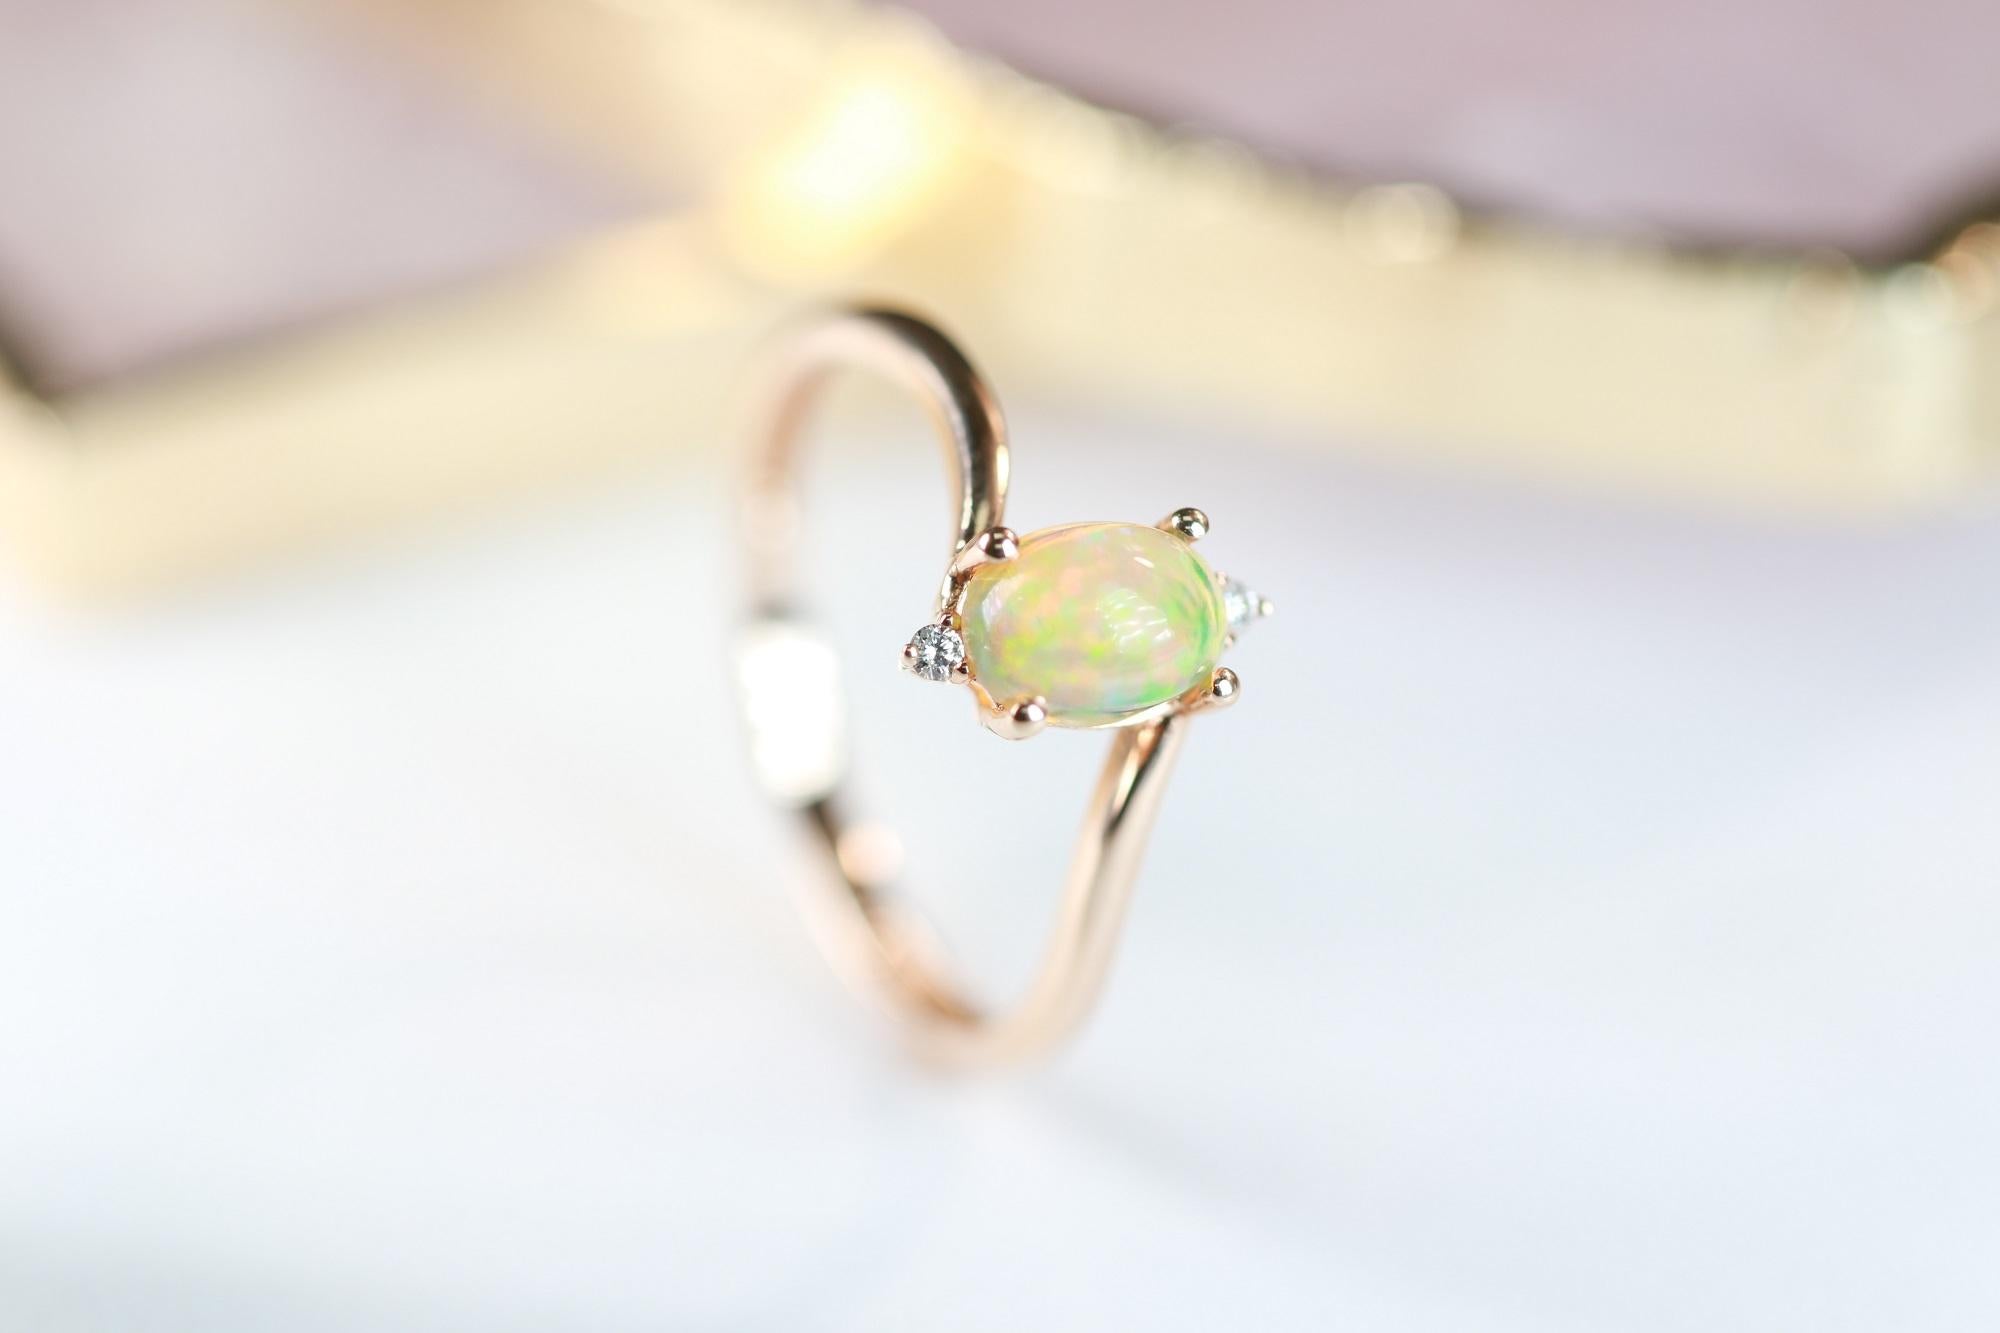 Stunning, timeless and classy eternity Unique Ring. Decorate yourself in luxury with this Gin & Grace Ring. The 14k Yellow Gold jewelry boasts Oval Cab Prong Setting Genuine Ethiopian Opal (1 pcs) 0.58 Carat, along with Natural Round cut white